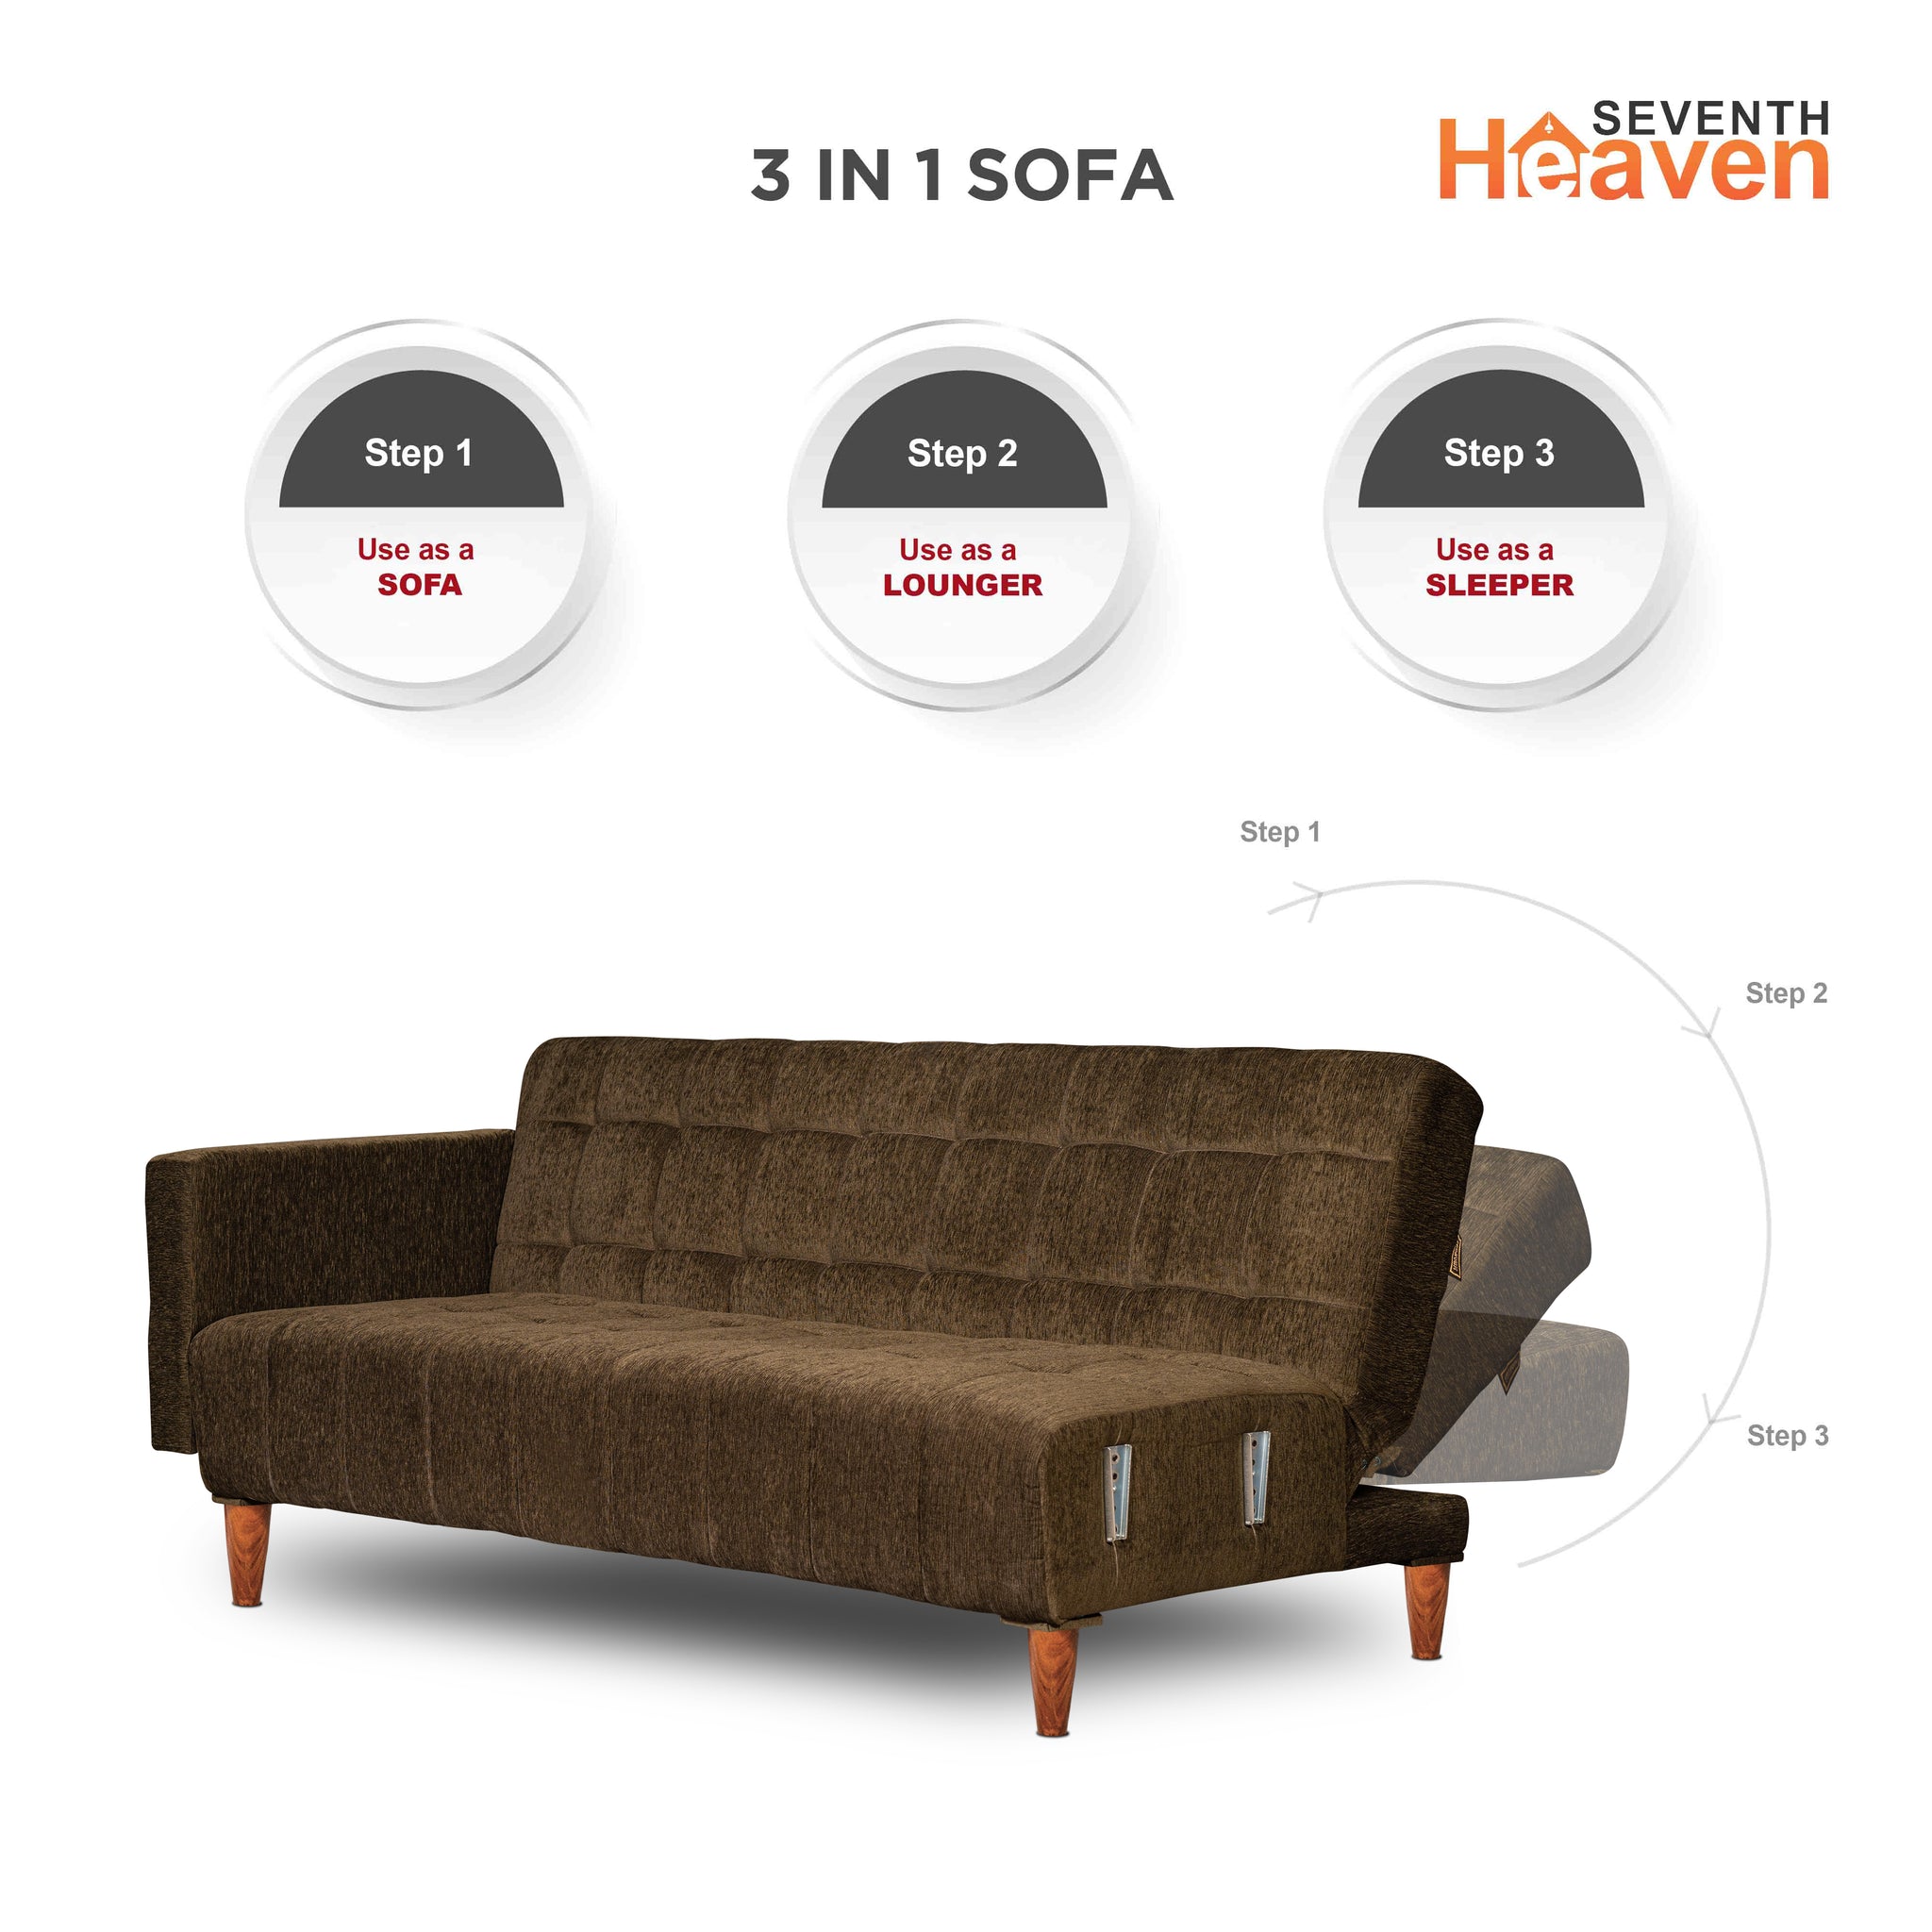 Seventh Heaven Lisbon 4 Seater Wooden Sofa Cum Bed with Armrest. Modern & Elegant Smart Furniture Range for luxurious homes, living rooms and offices. Use as a sofa, lounger or bed with removable armrest. Perfect for guests. Molphino fabric with sheesham polished wooden legs. Green colour.